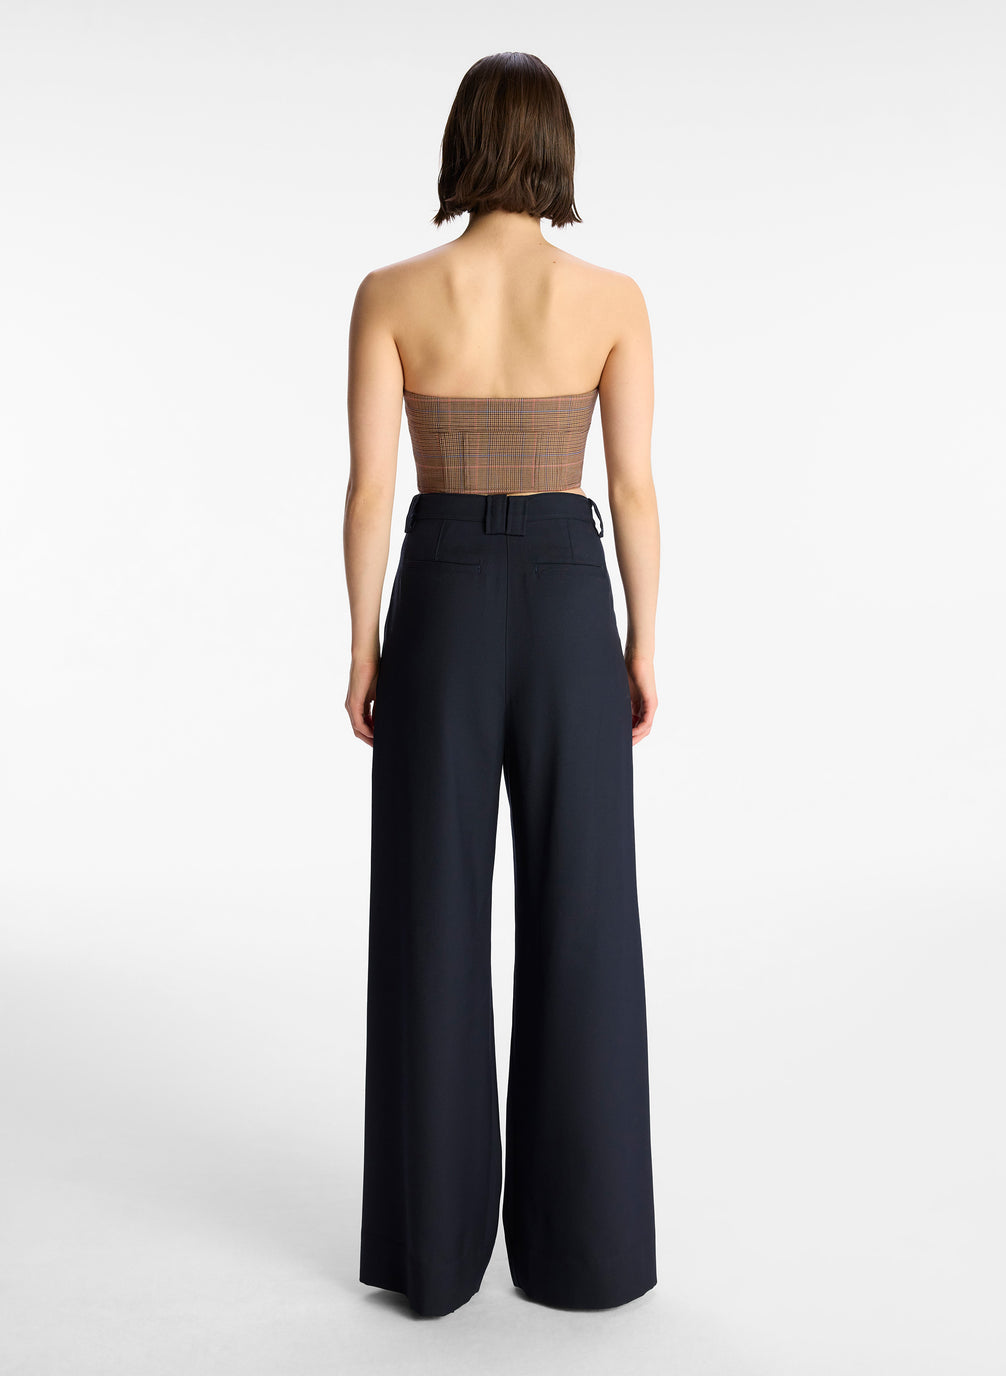 back view of woman wearing brown plaid strapless top and black pants